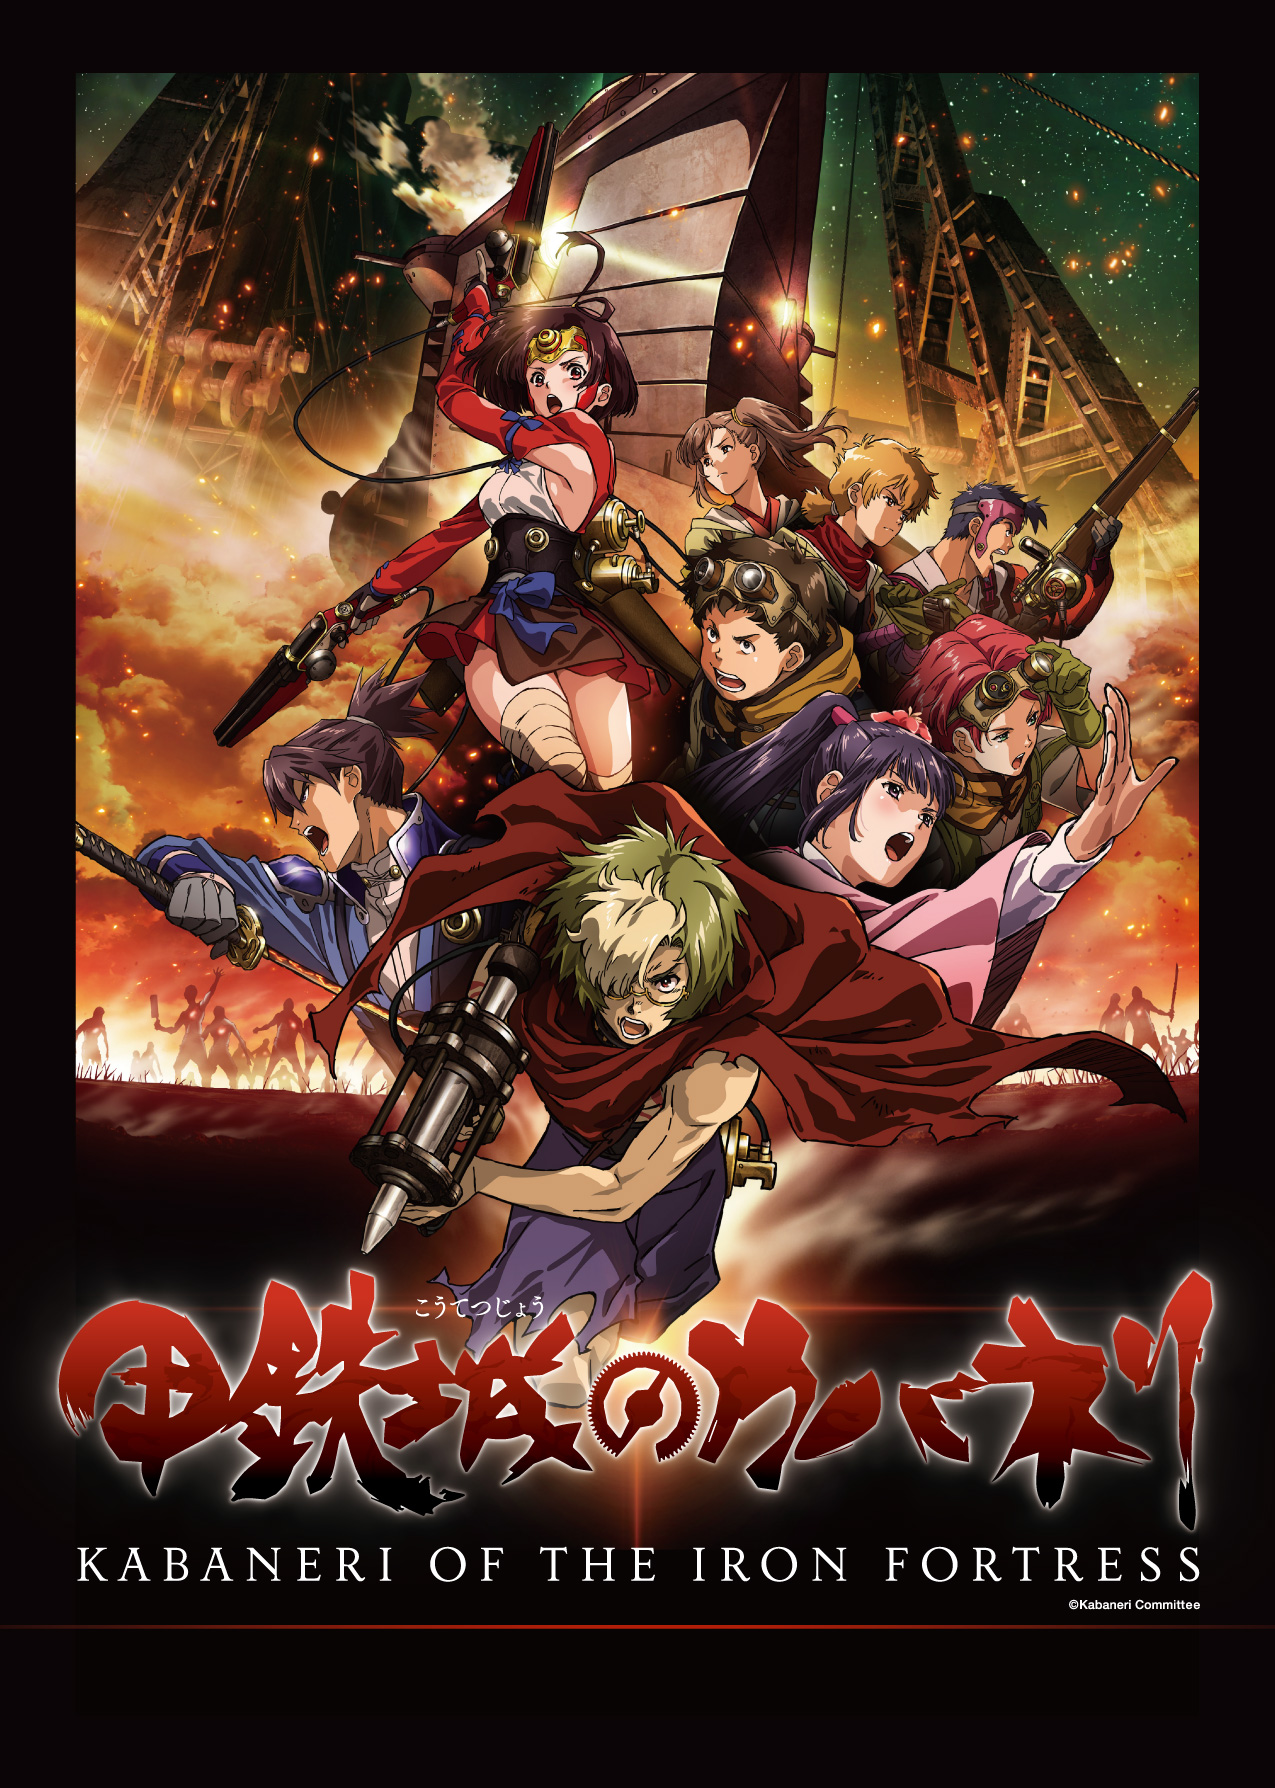 Kabaneri of the Iron Fortress Episode 1 Review - Crow's World of Anime